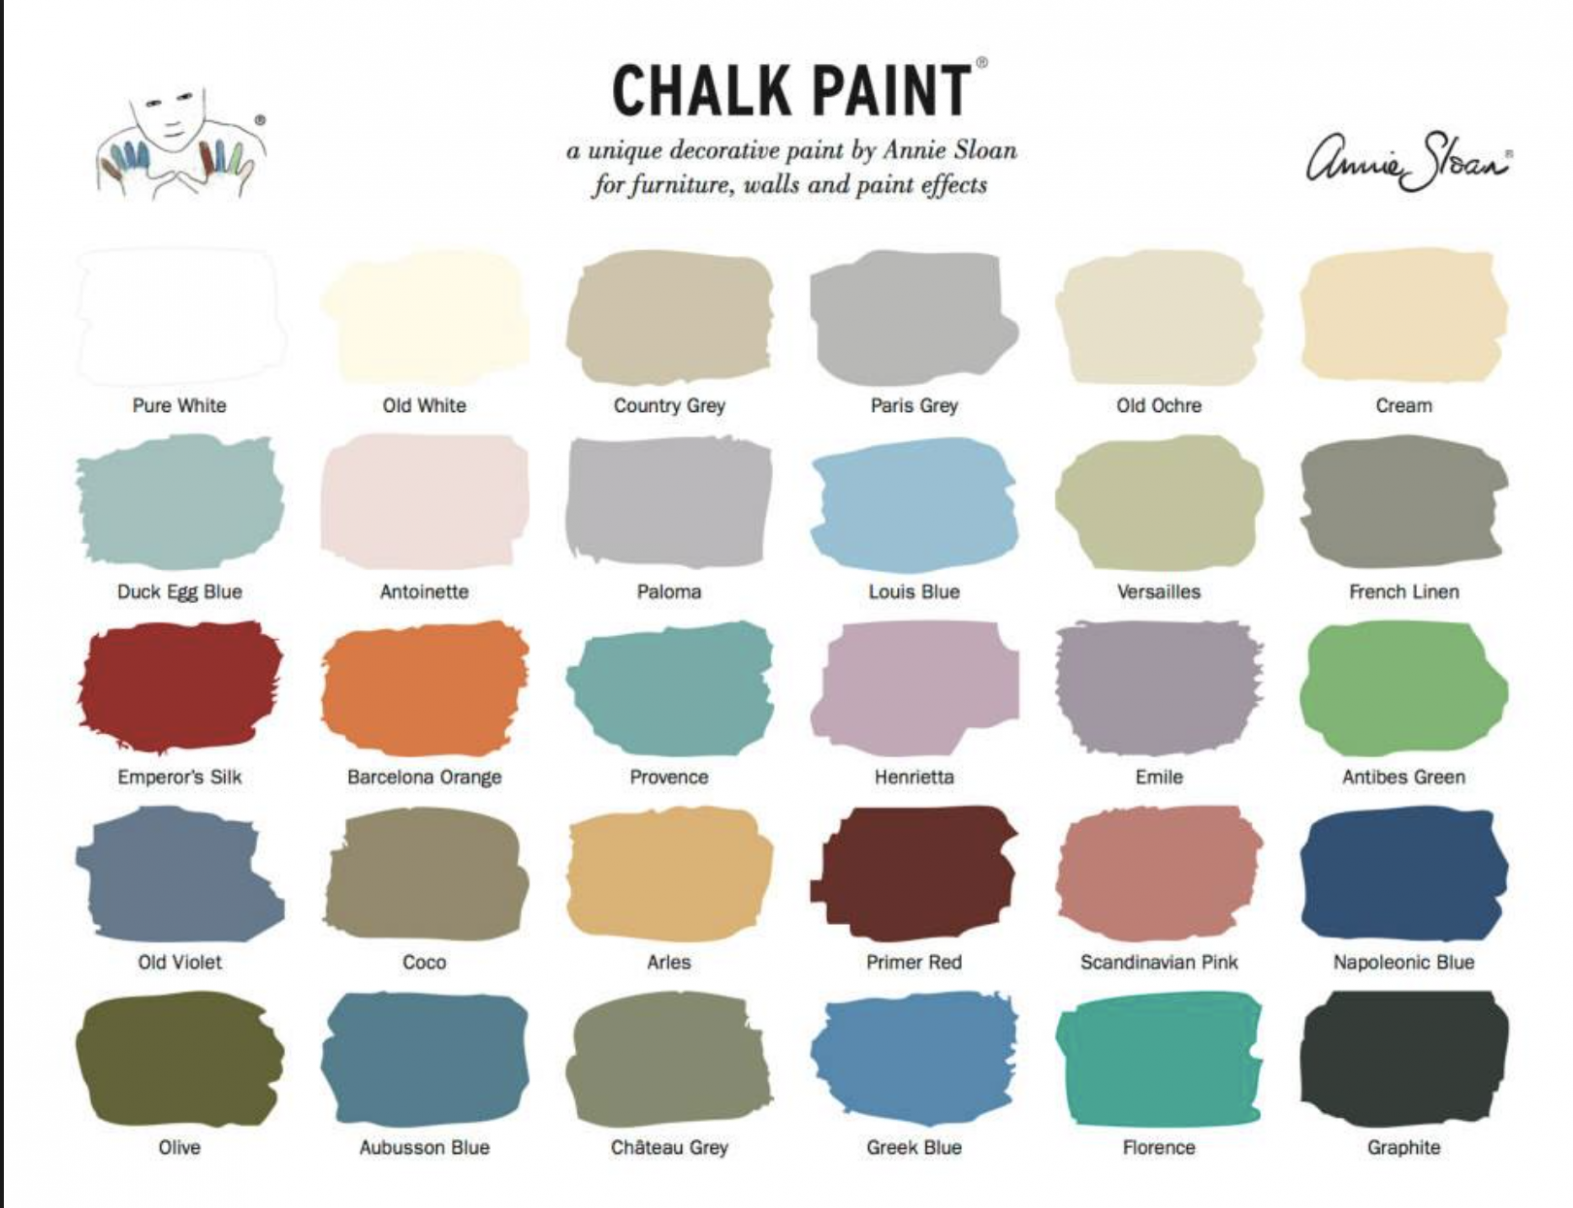 Painted Piano Soft Pink Chalk Paint Nesting With Grace Where To Buy Annie Sloan Chalk Paint Utah